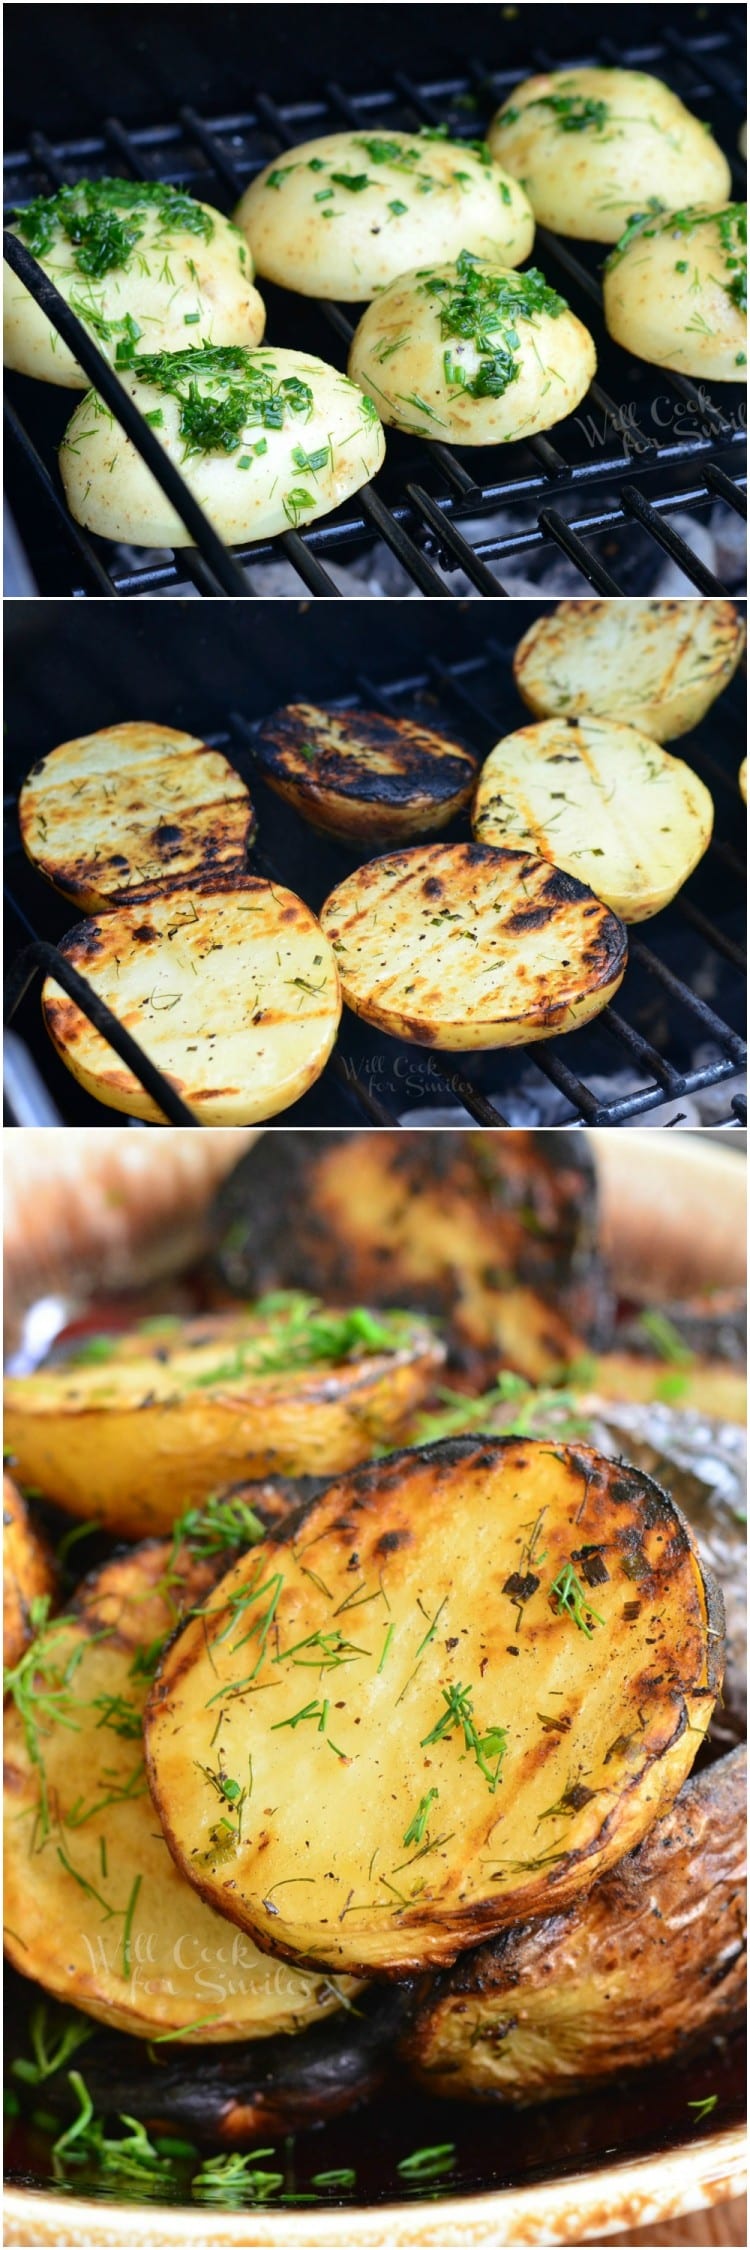 steps to make potatoes collage 1st phot potatoes cut in half cut side down on grill, 2nd photo potatoes cut side up on grill, 3rd photo potatoes in a bowl 